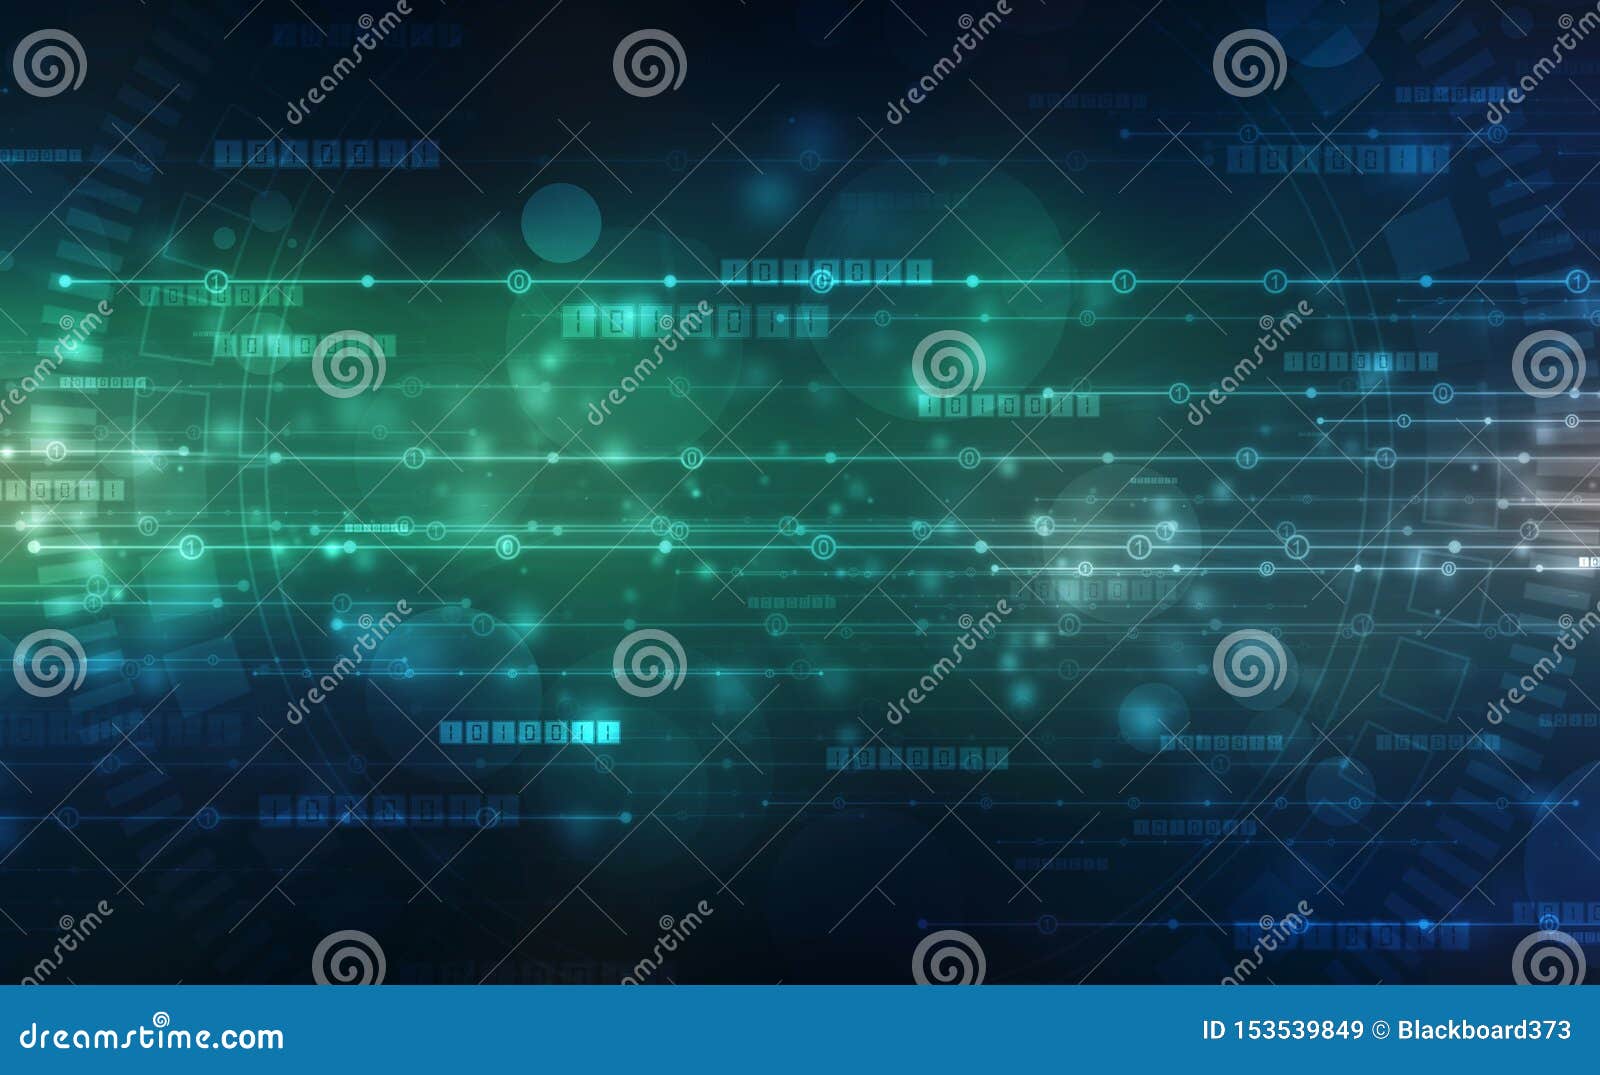 binary code background, digital abstract technology background, futuristic background